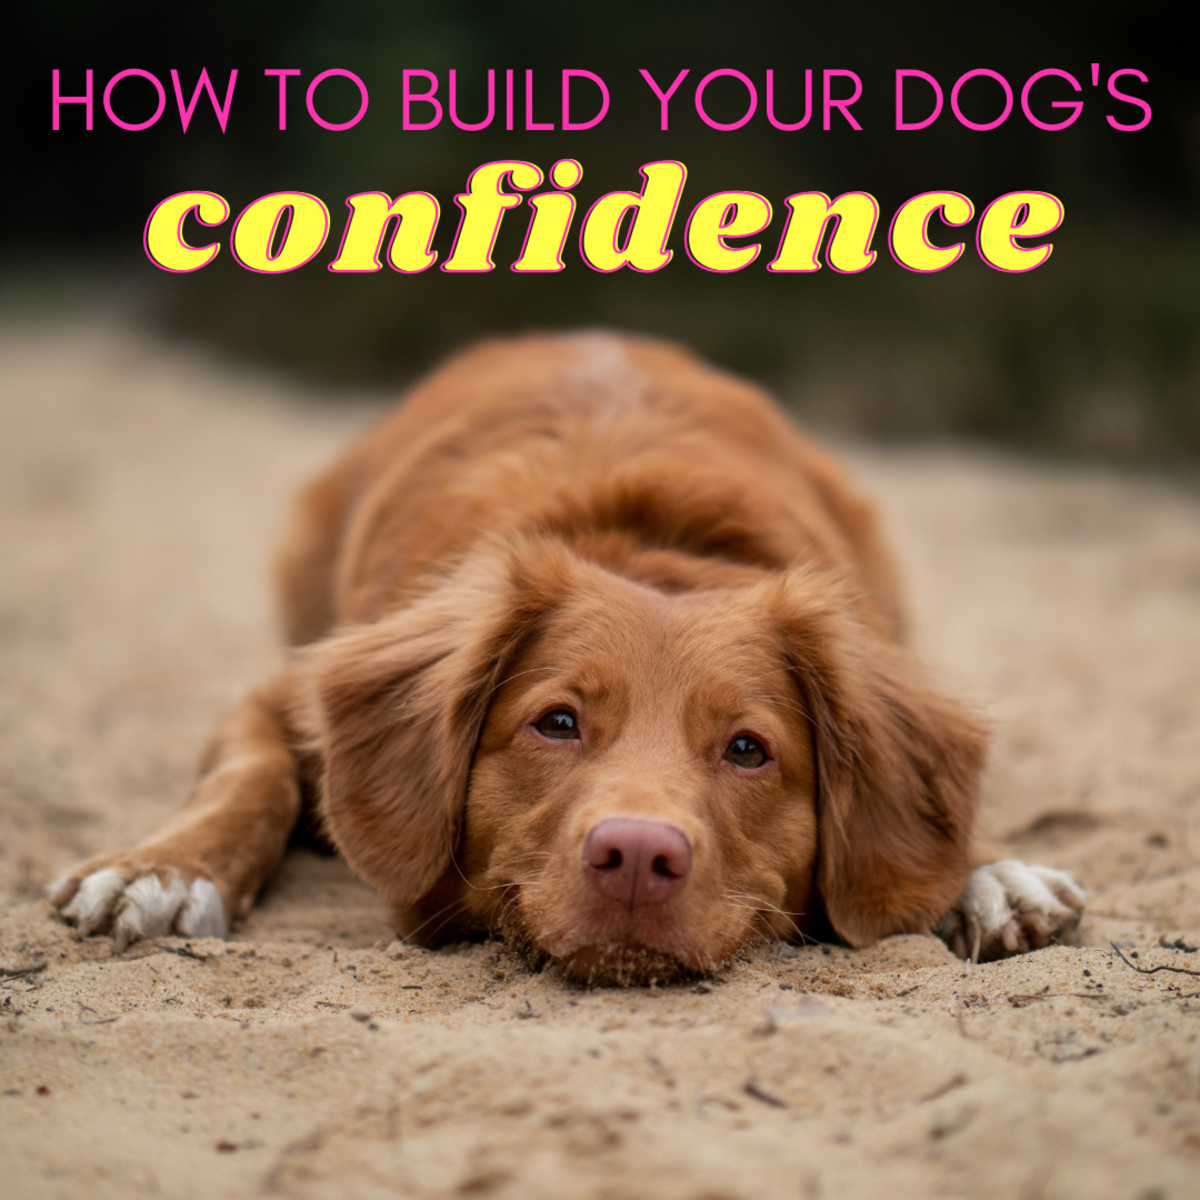 How Can I Effectively Address And Manage Submissive Dog Behaviour?